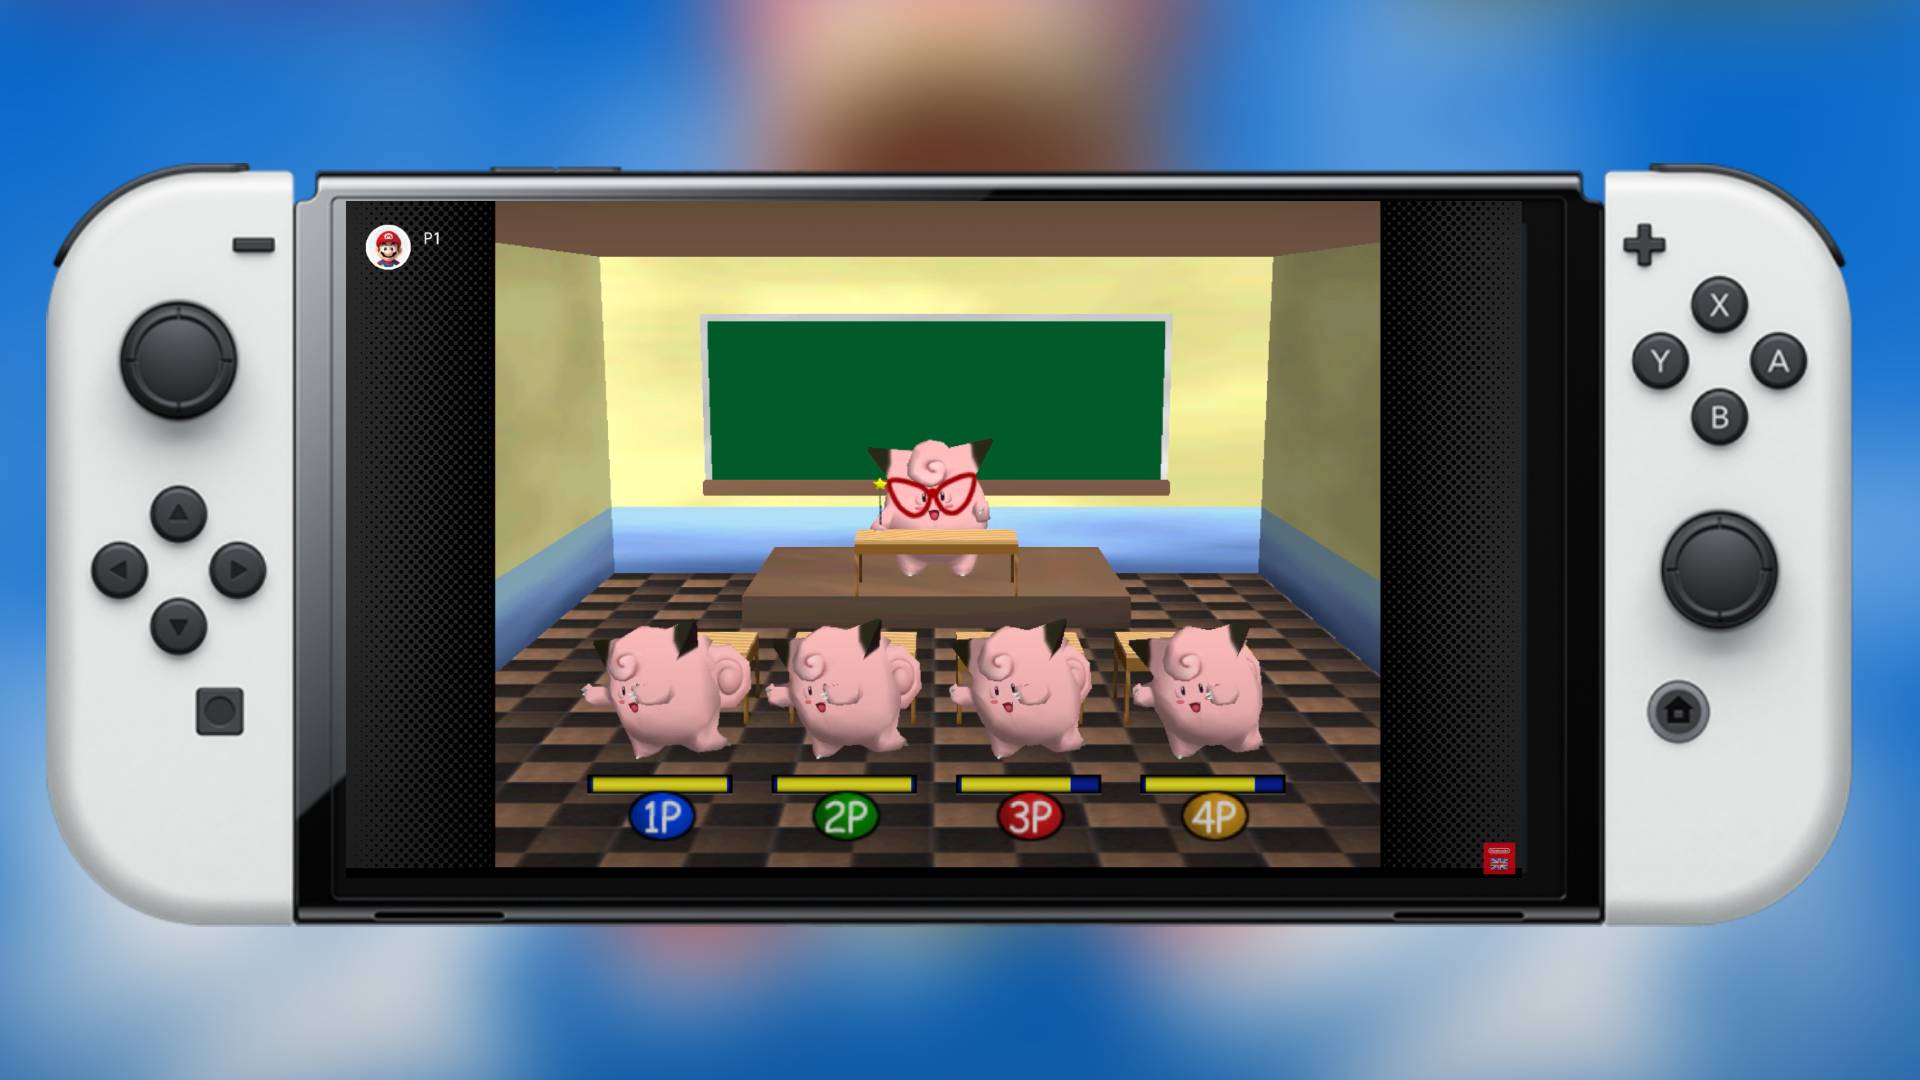 Nintendo Switch Titles Can Now Be Emulated on Android Devices